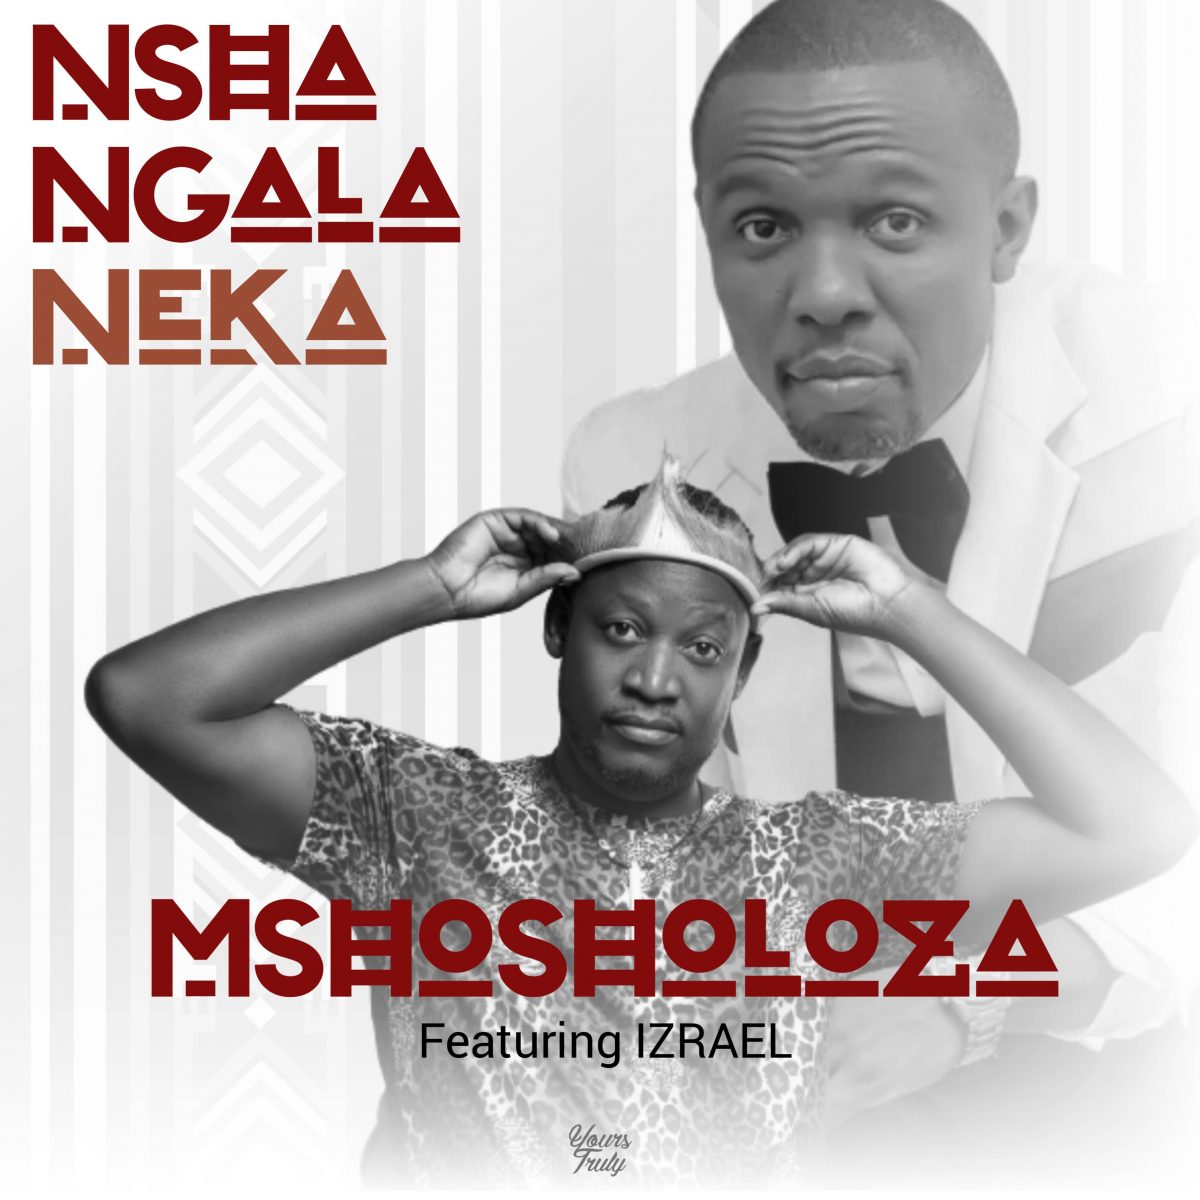 Mshosholoza Set To Unveil Another Banger featuring Izrael